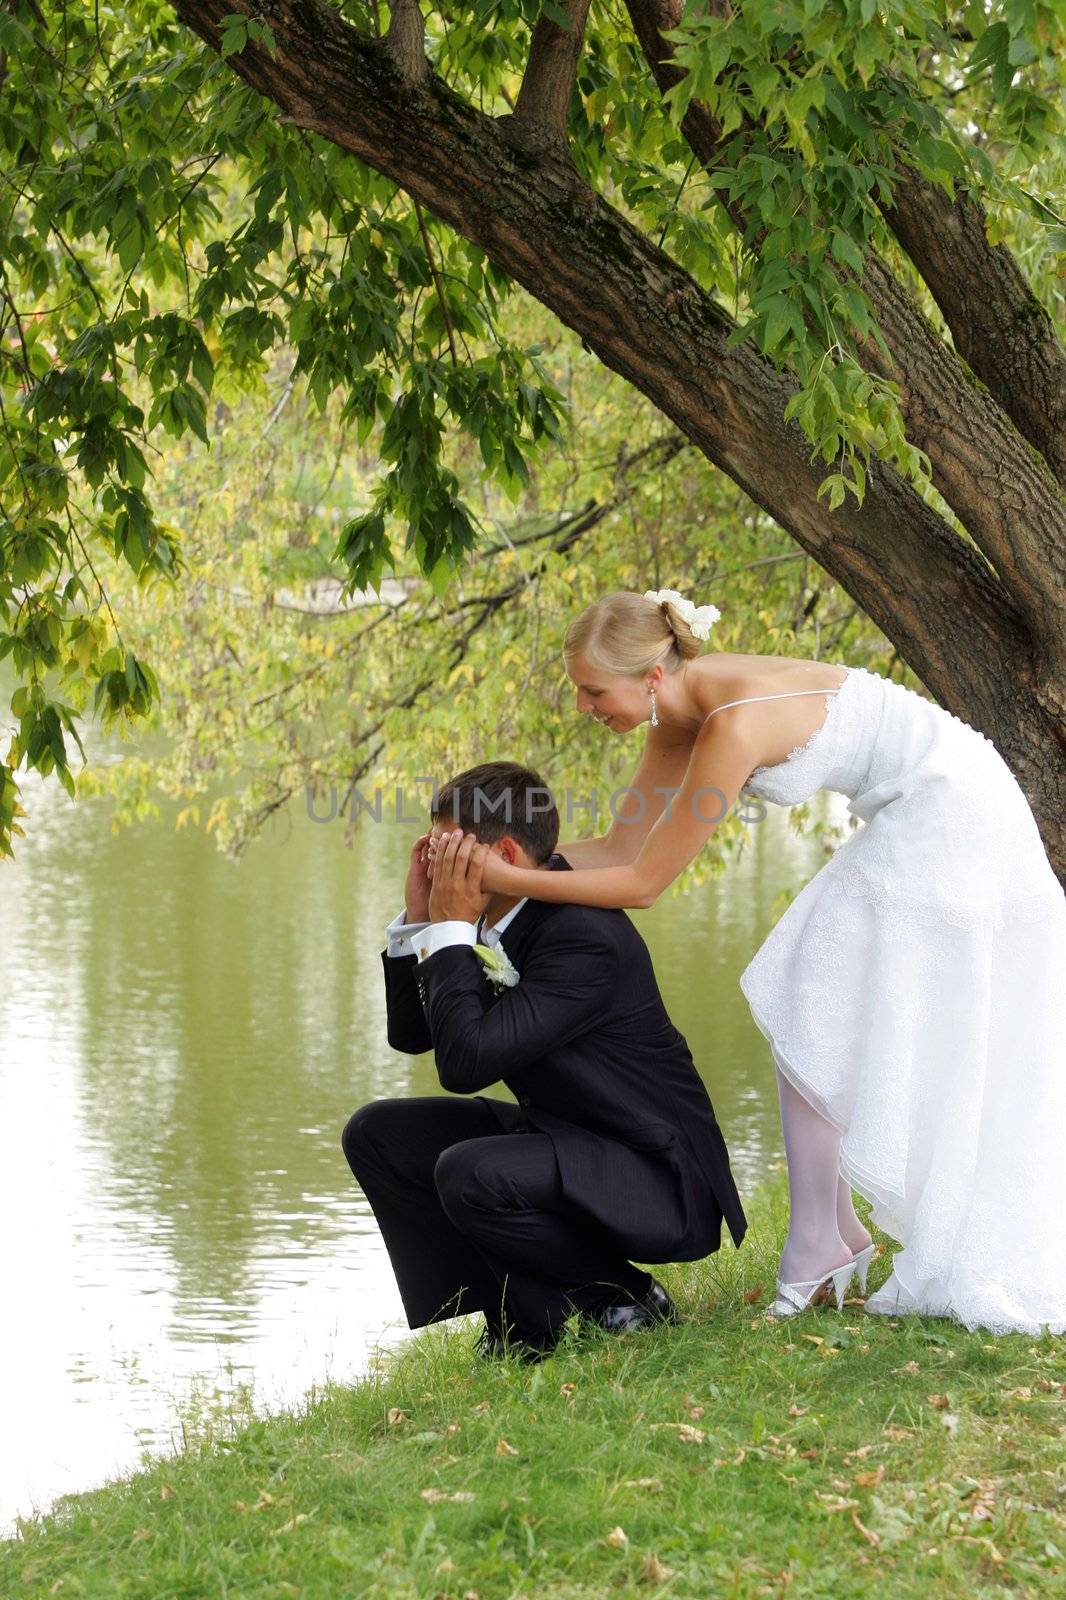 Couple romancing by side of lake, newlywed bride and groom.